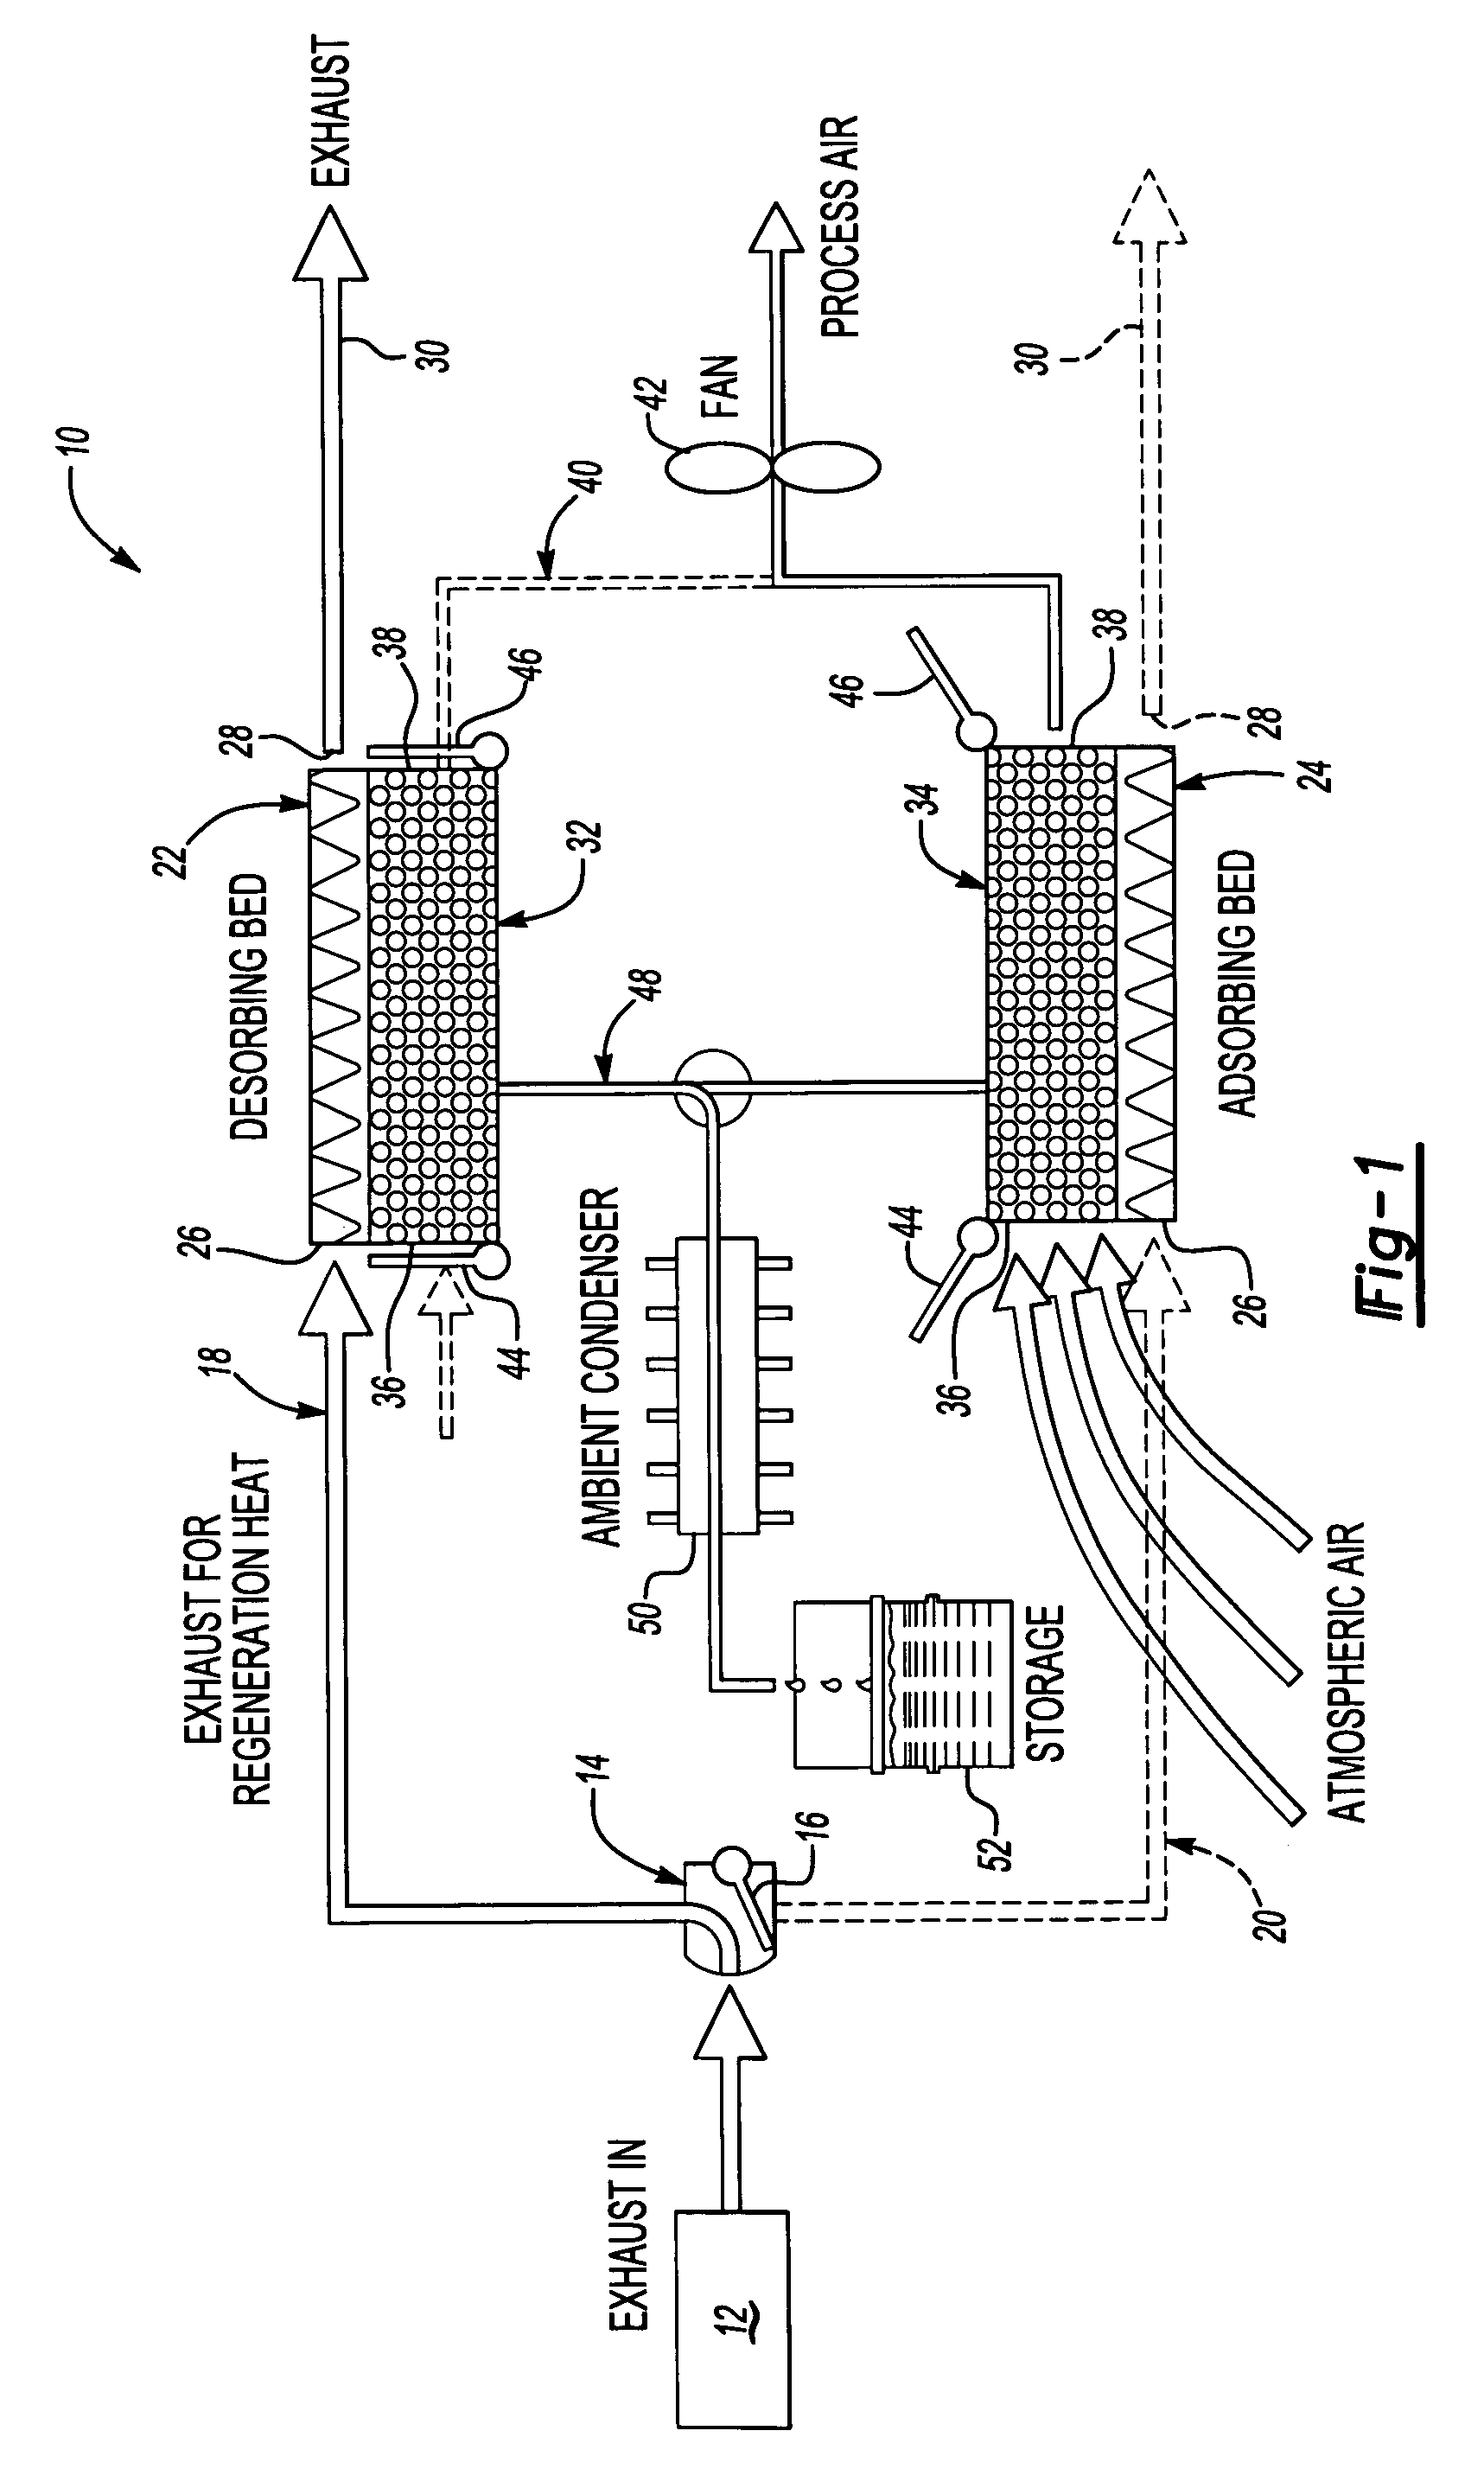 Water-from-air using liquid desiccant and vehicle exhaust